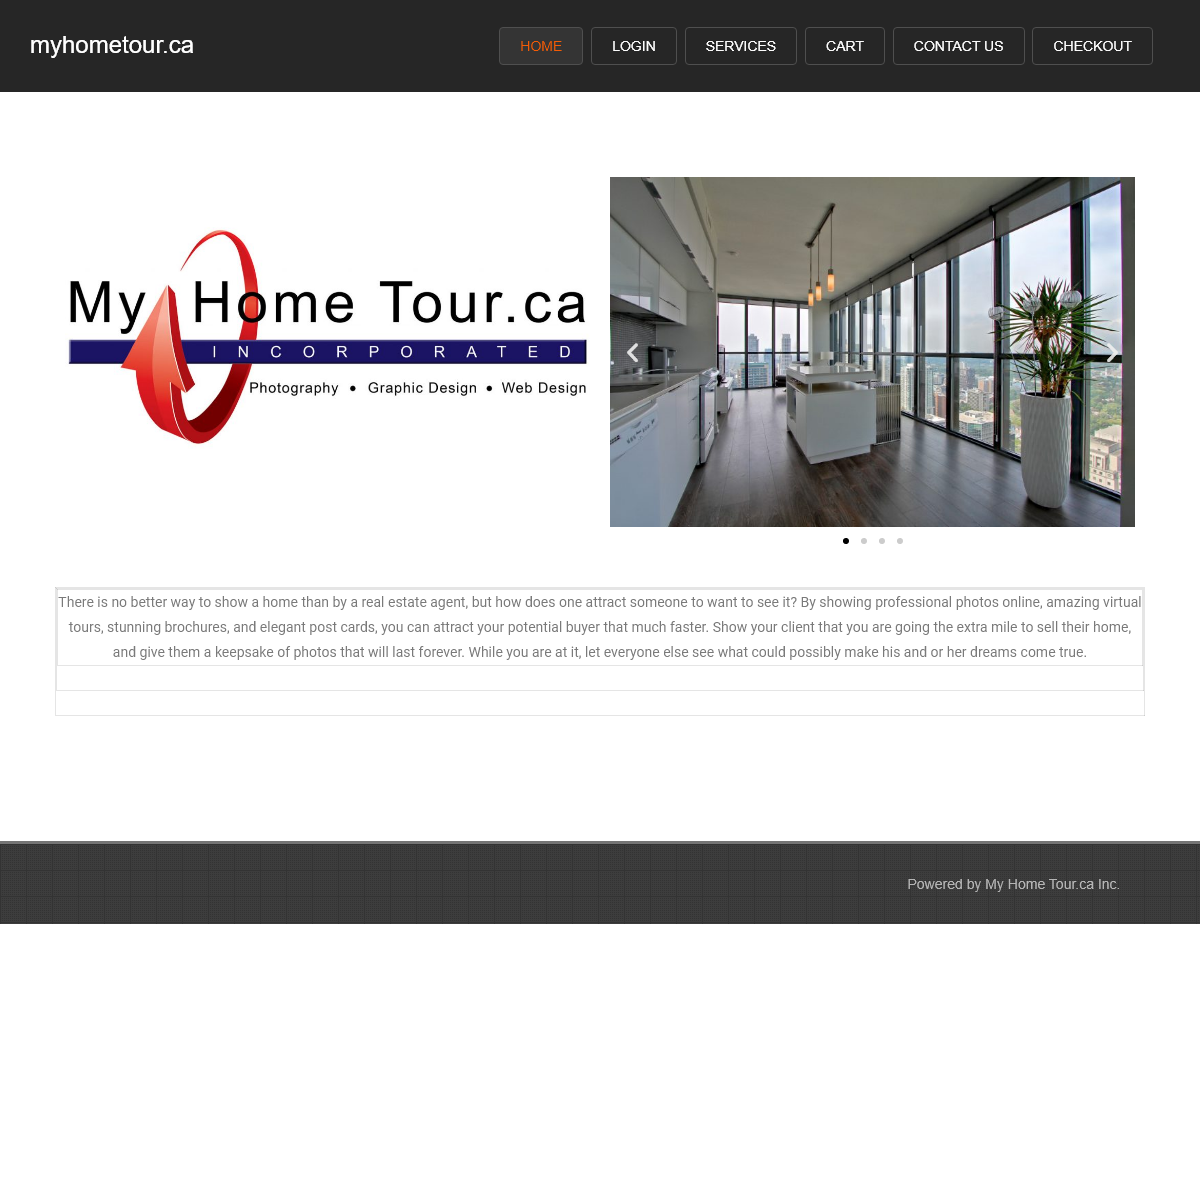 A complete backup of myhometour.ca